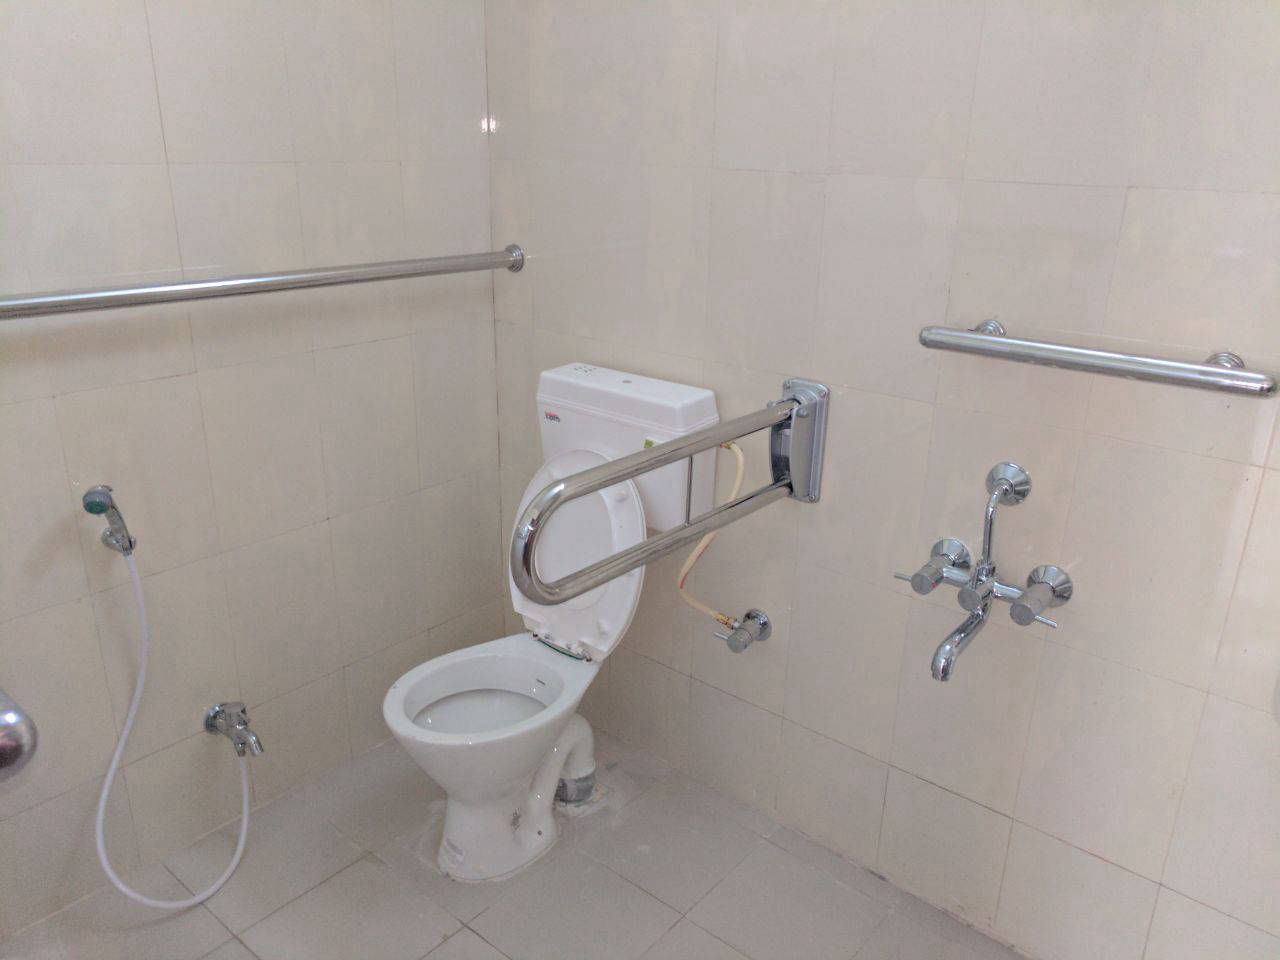 NMT's Day Care Centre at Hyderabad has a senior-friendly toilet